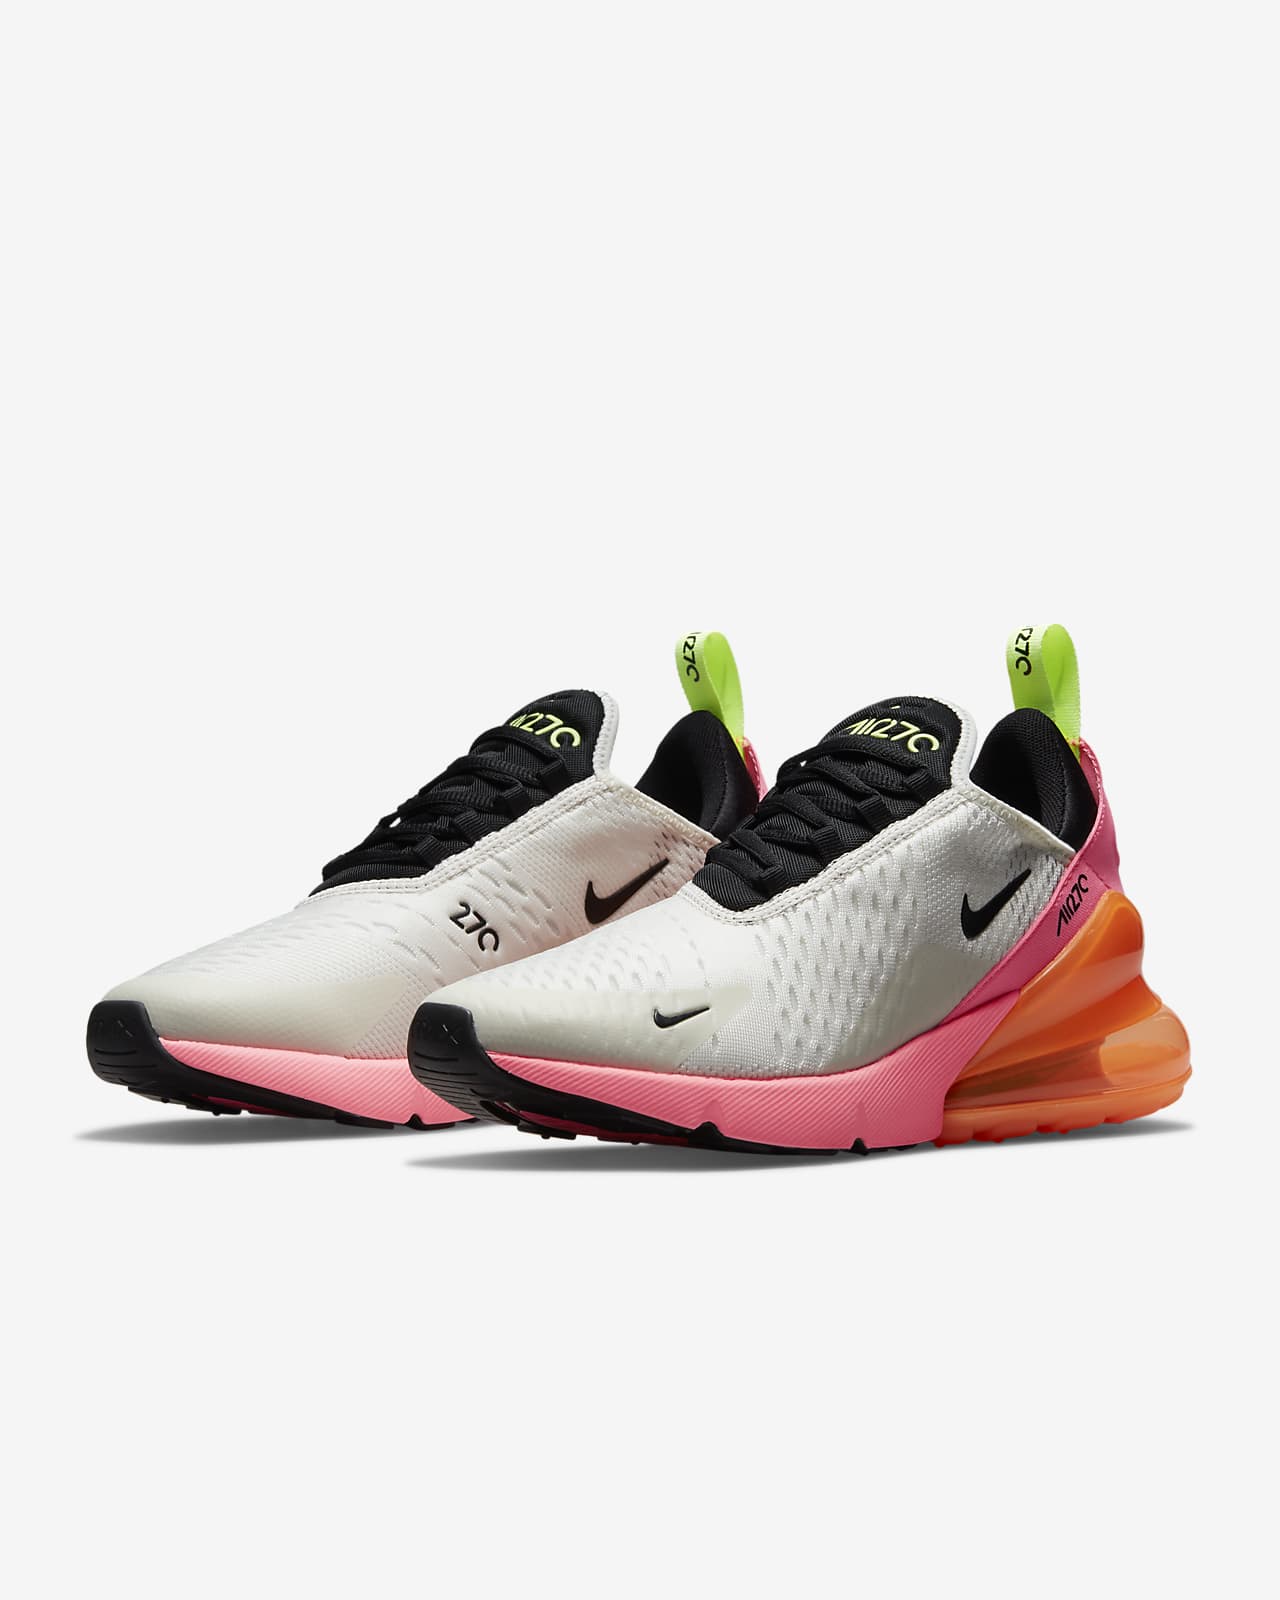 nike womens shoes colorful